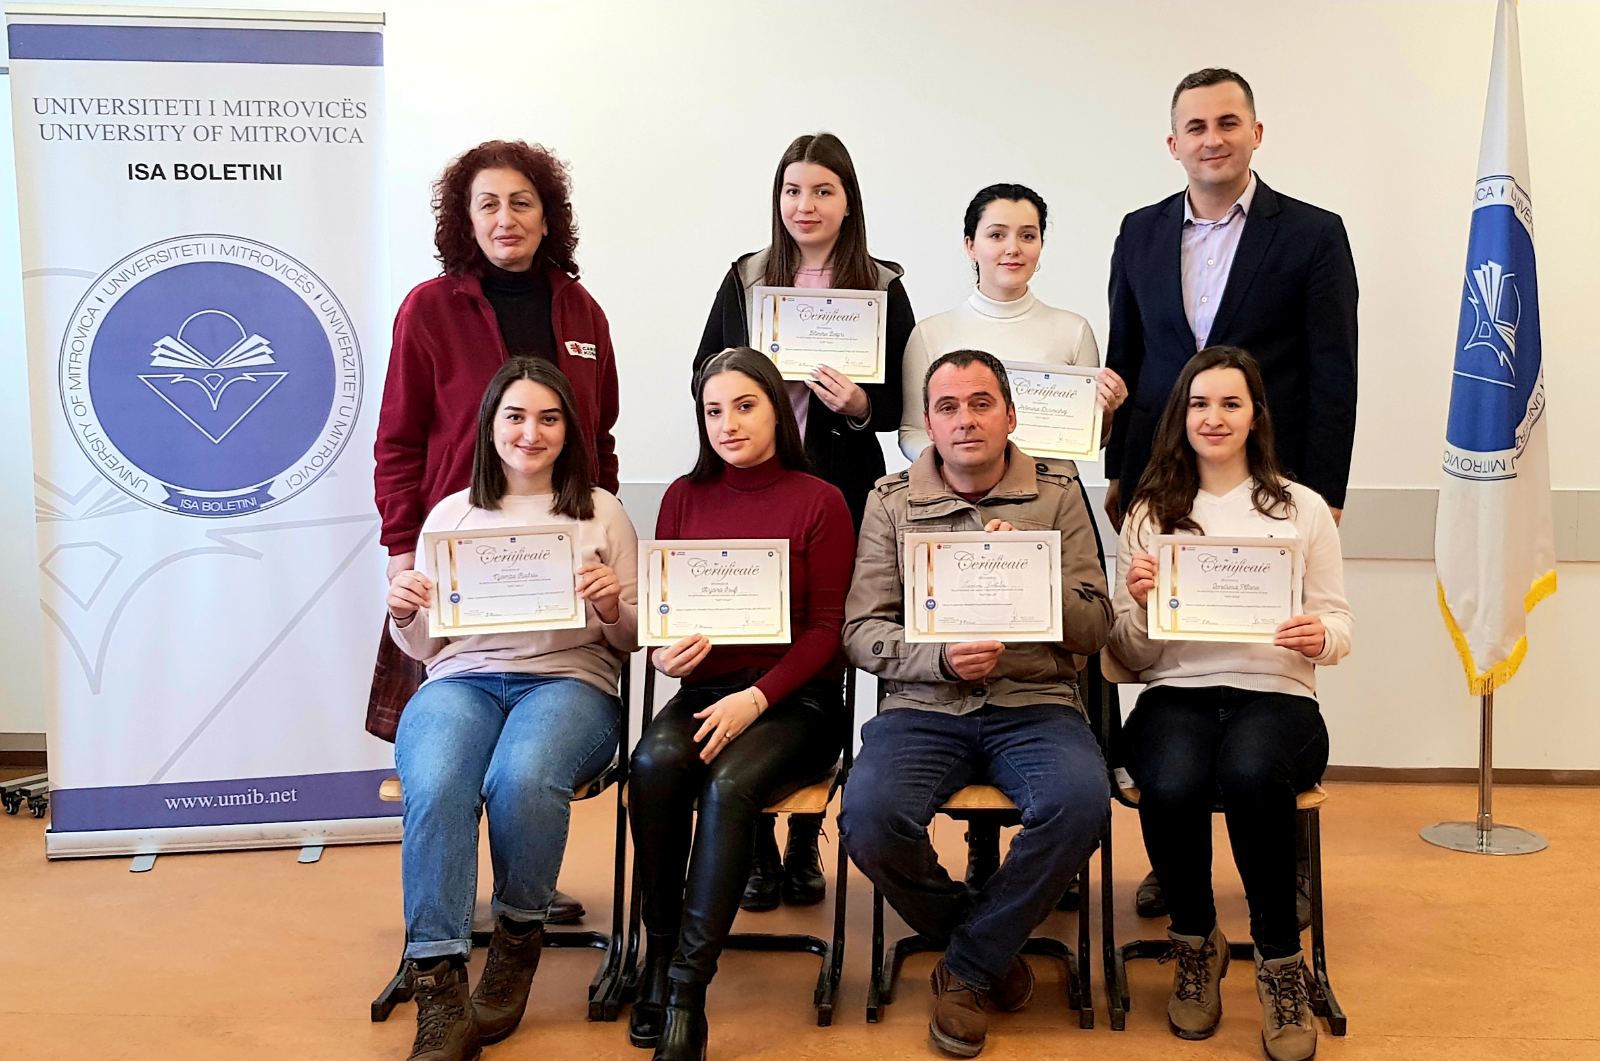 The Certification Of Participants In The Soft Skills Training